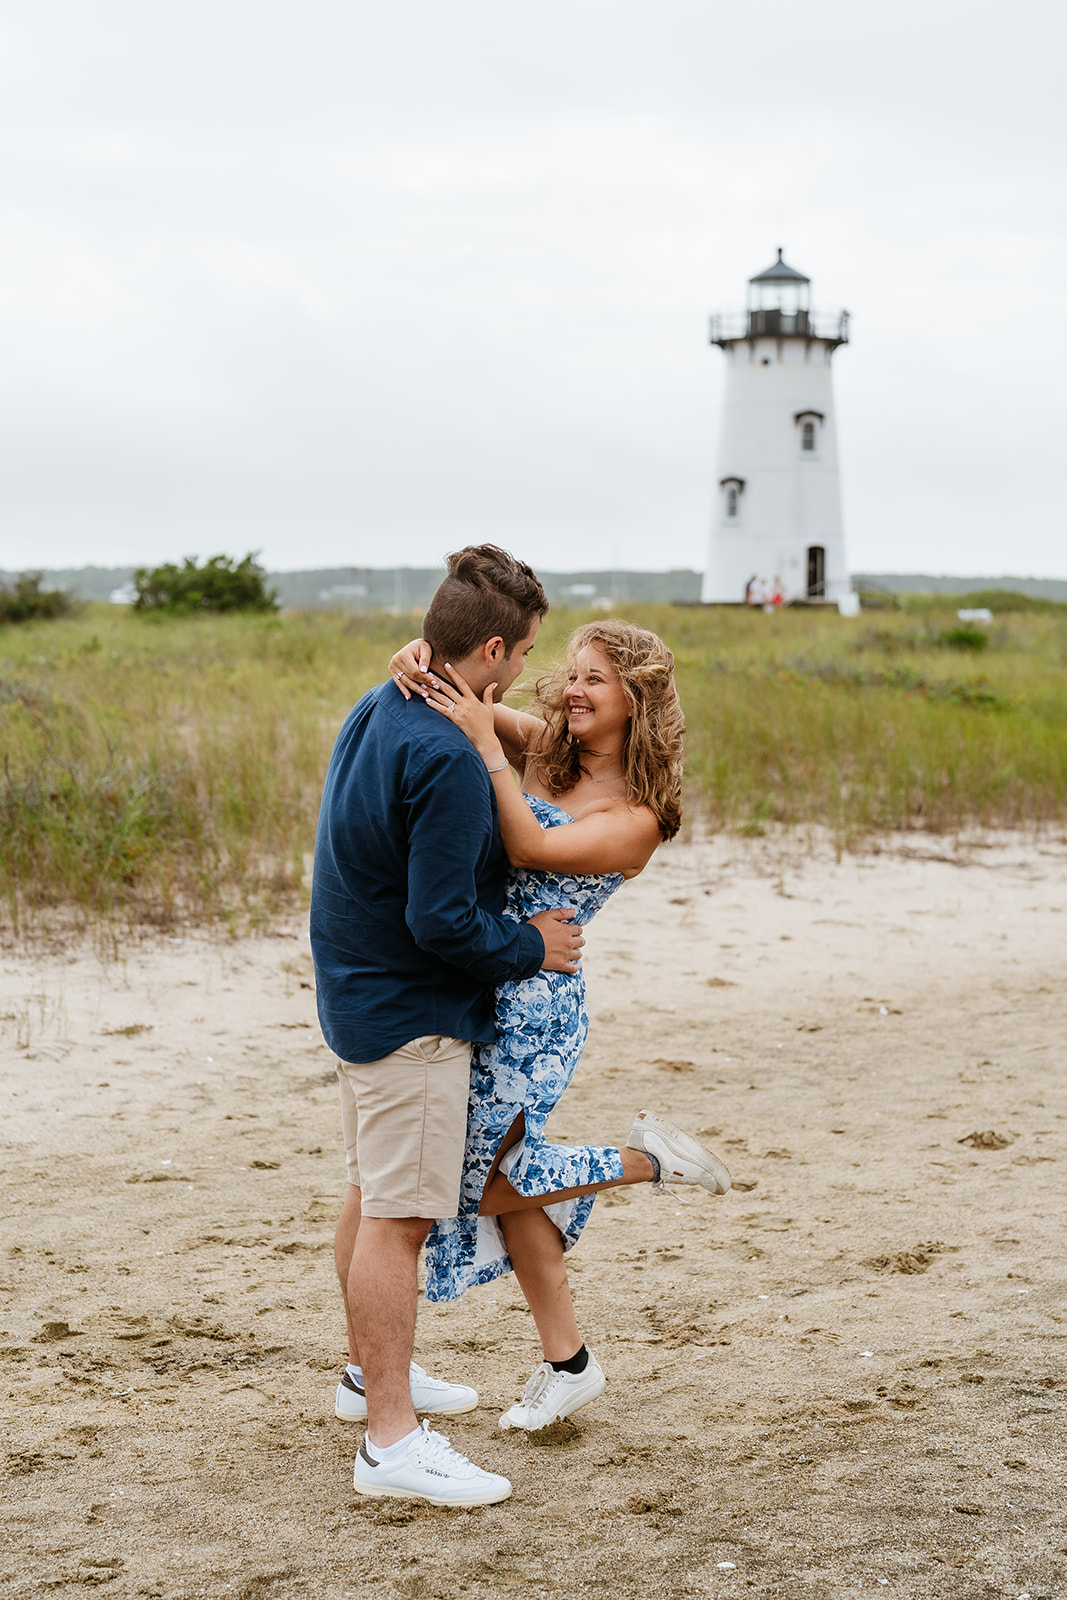 A couple kissing on a sandy beach with Edgartown Harbor Lighthouse  in the background. the woman wears a blue dress and the man a navy sweater and beige shorts.